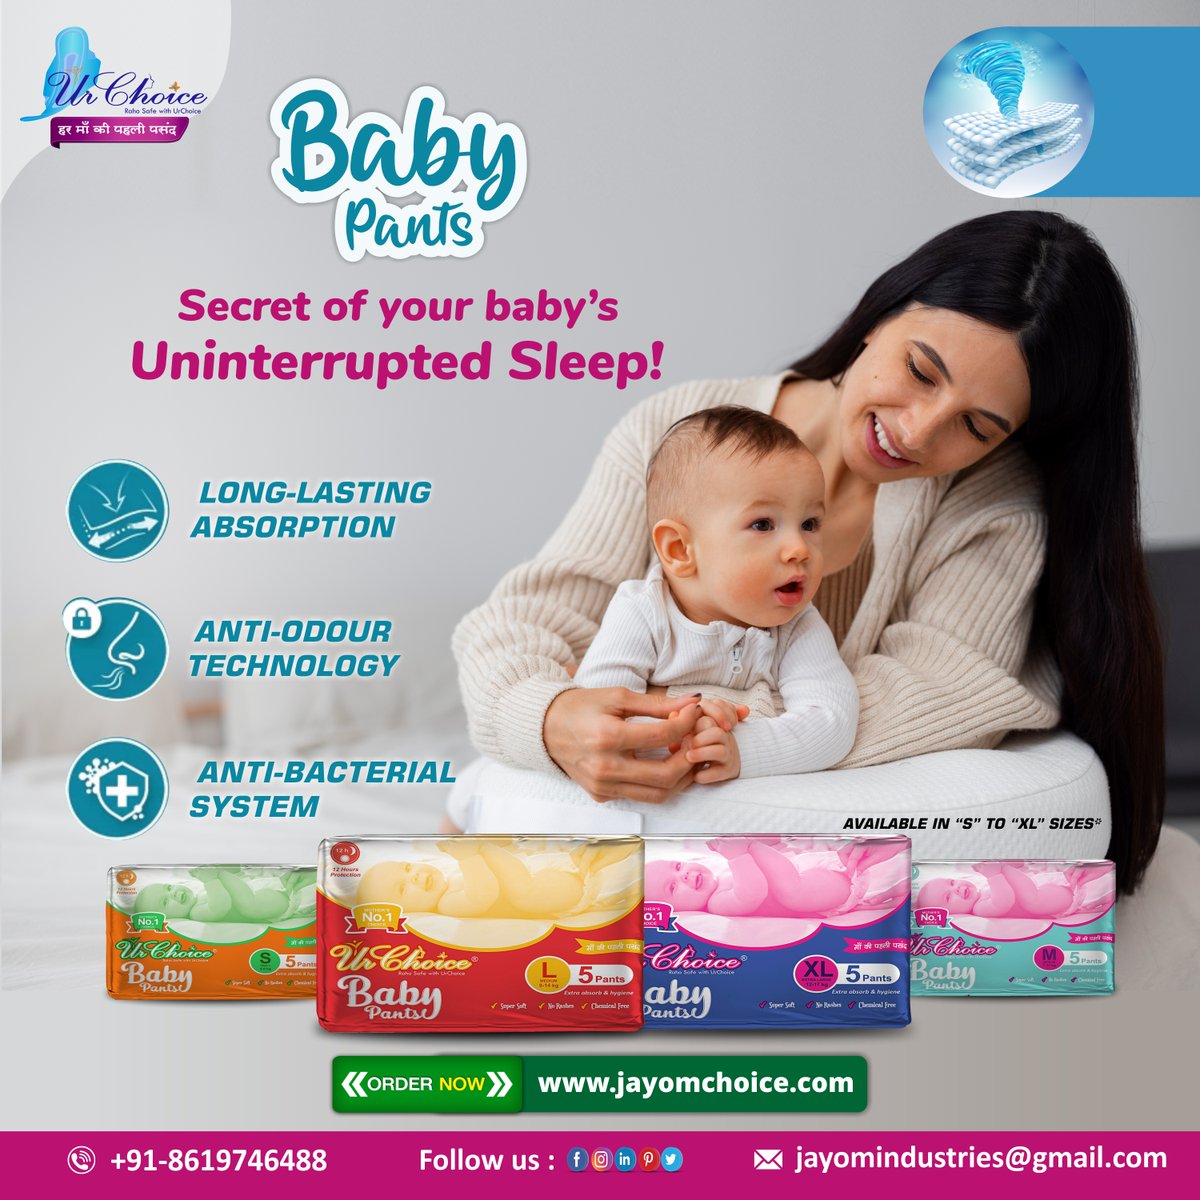 Happy Baby, Happy Parent! Experience Leak-Free Comfort and Protection with Baby Pants Diapers.
Order Now : jayomchoice.com
#DiaperDays #CutieInNappies #baby #urchoice #babypants #infantsleep #diapers #No1HygienicProtection #comfort #babydiapers #newborn #babylove #JrNTR